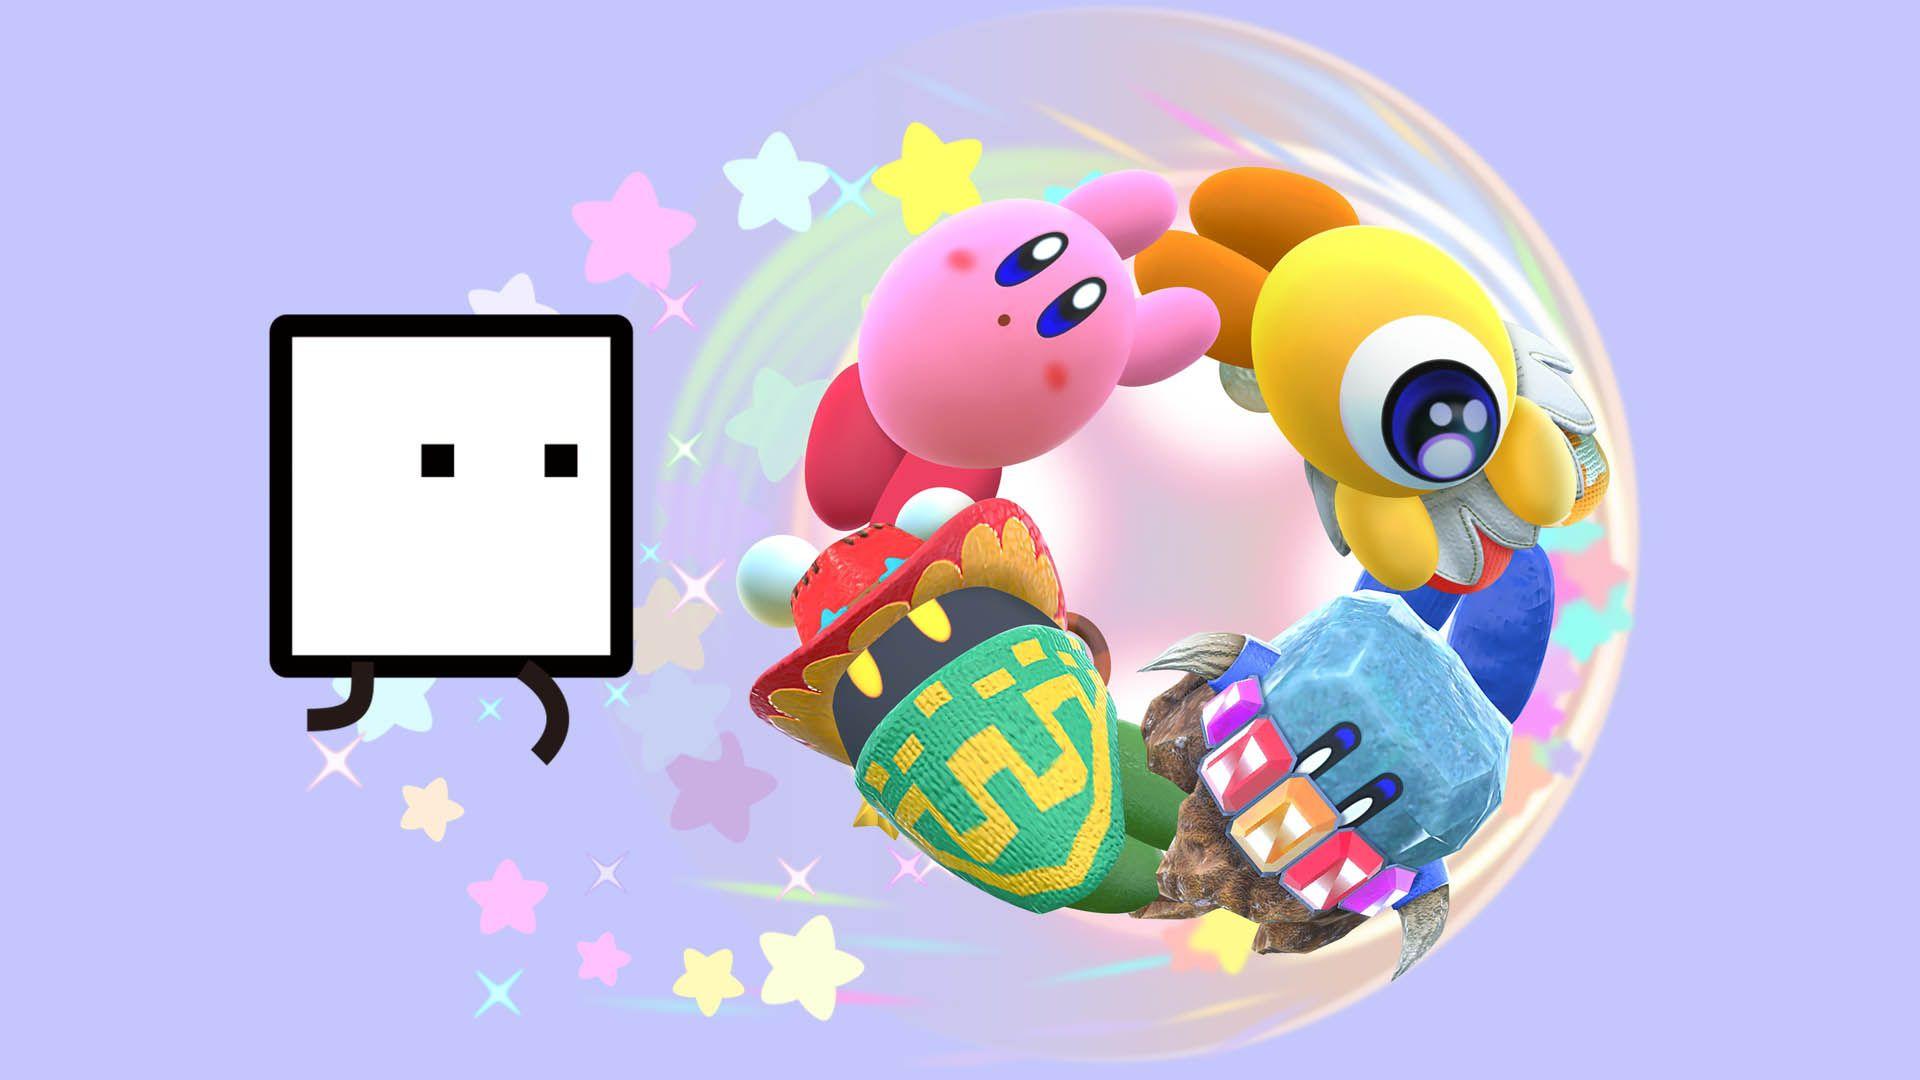 Qbby set to cameo in Kirby Star Allies